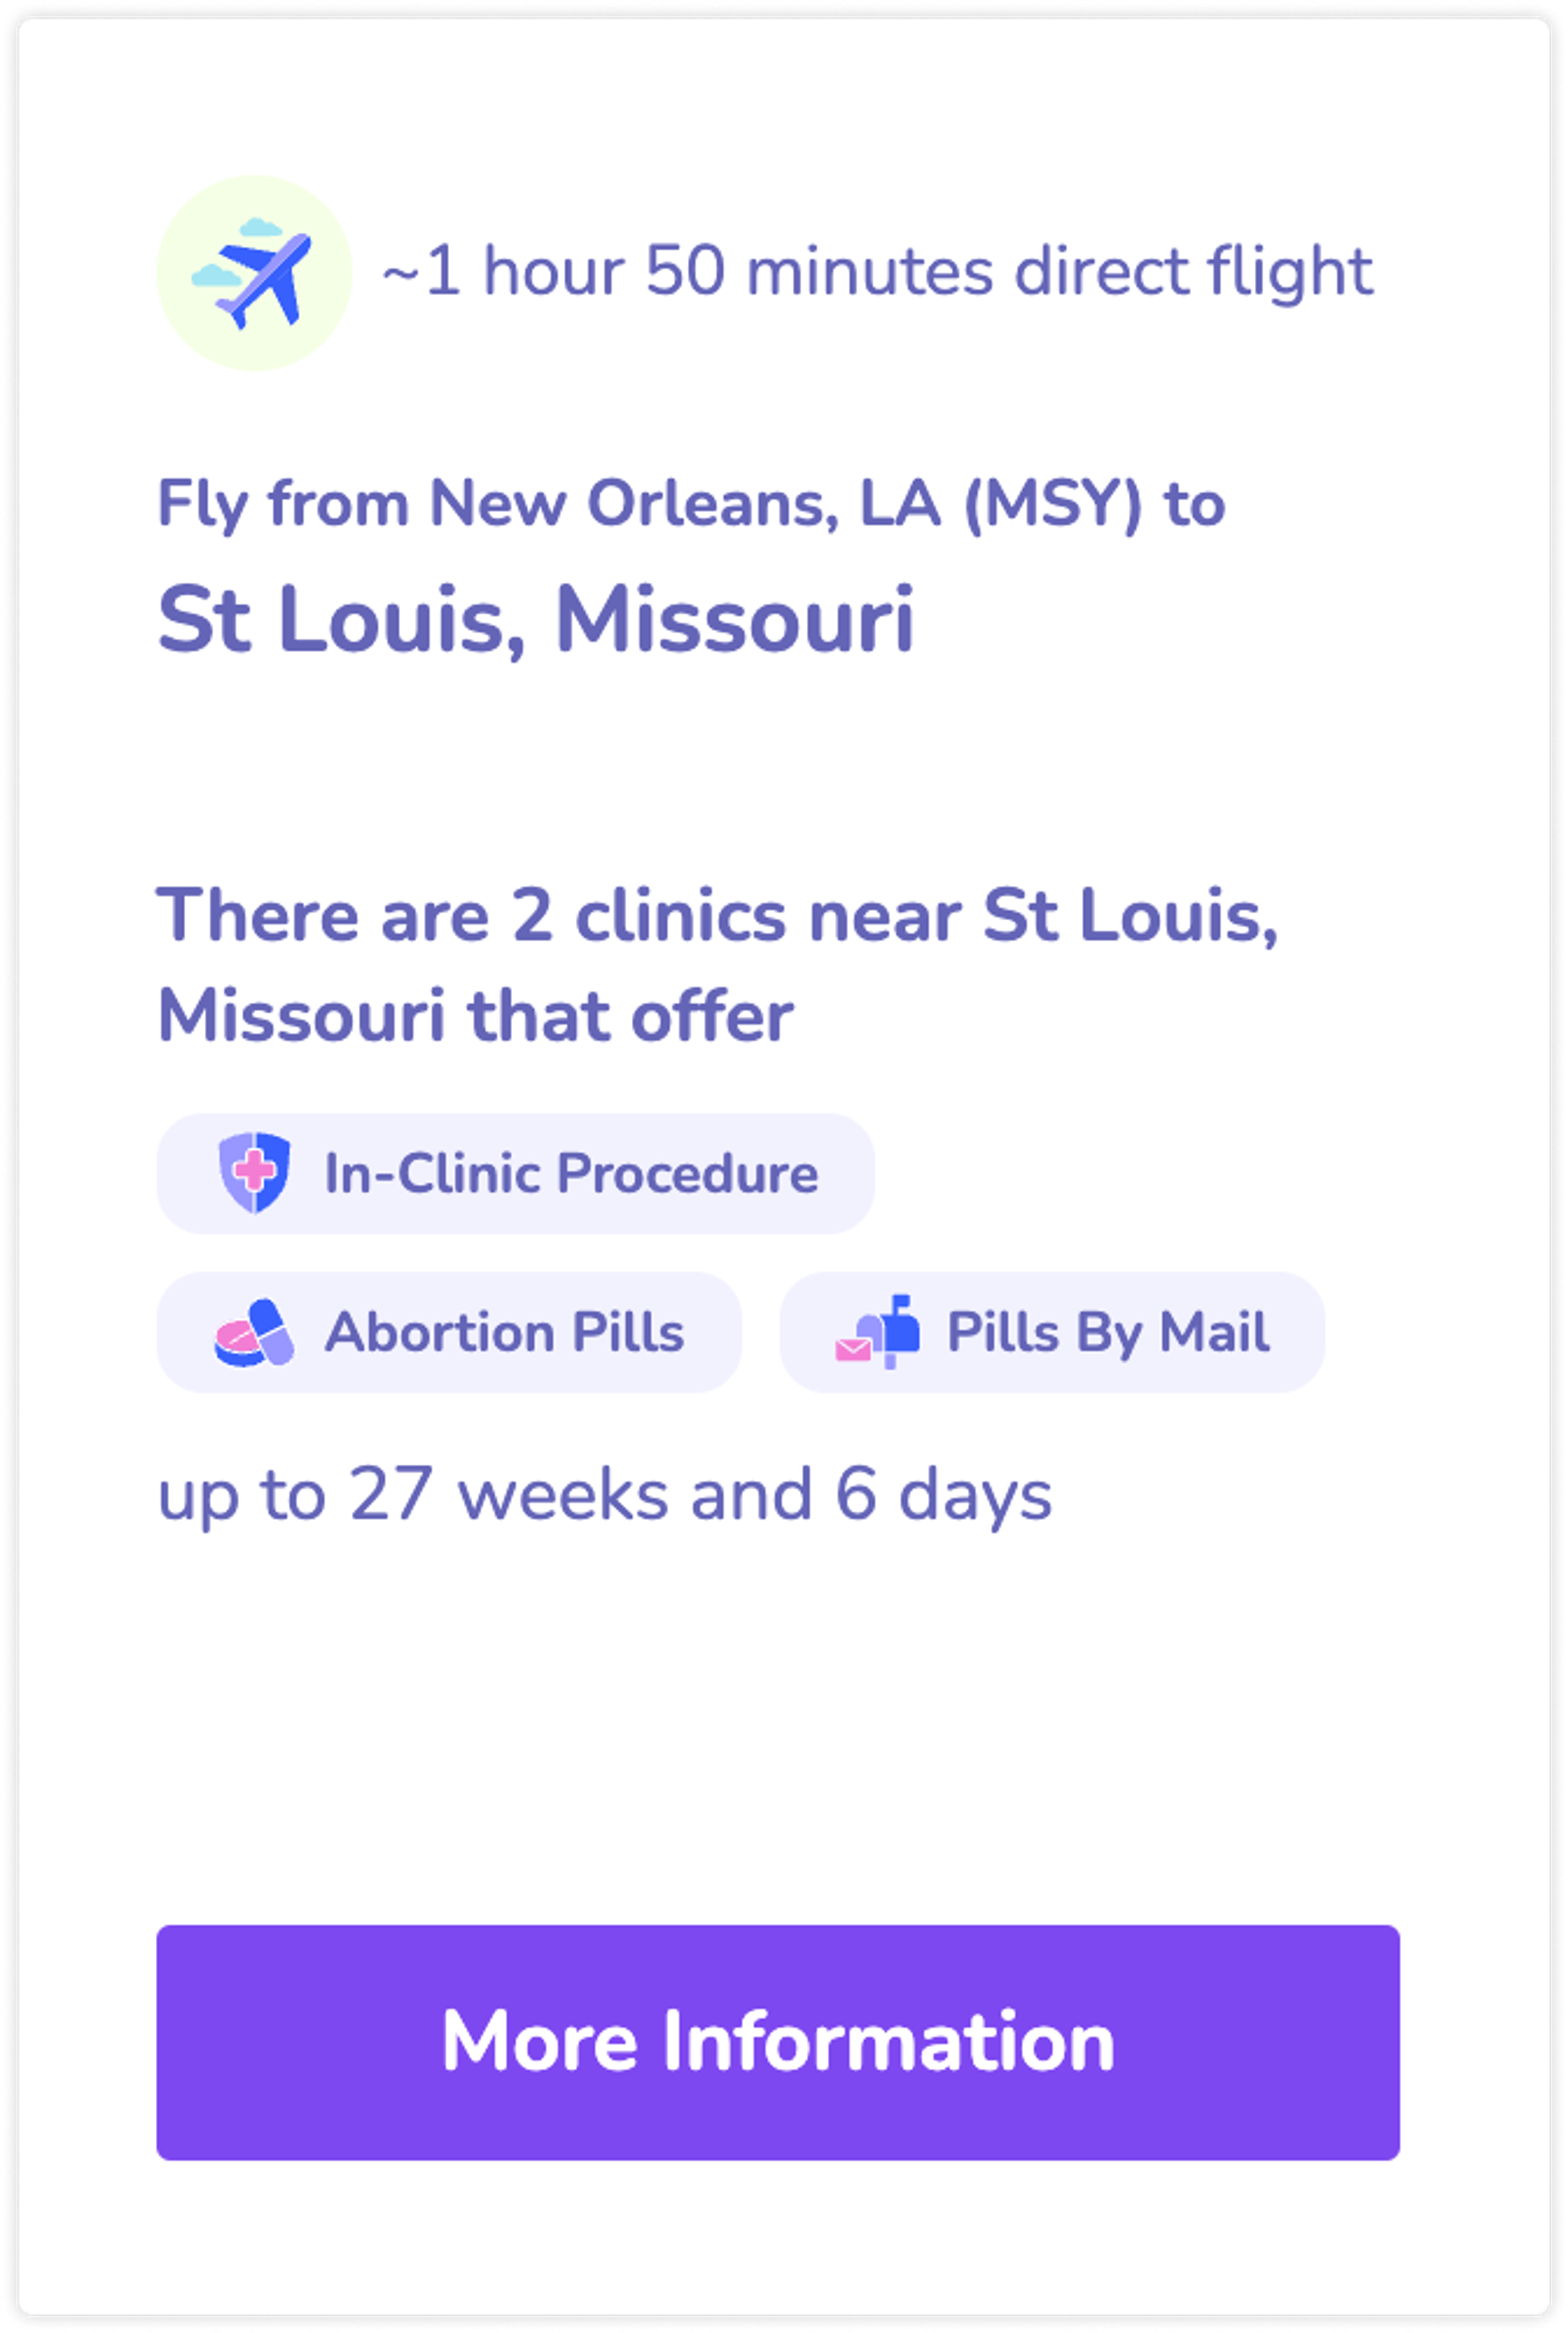 example of a flight path card that shows St Louis Missouri is a 2 hour direct flight from New Orleans and has 3 clinics nearby offering abortions up to 27 weeks and 6 days